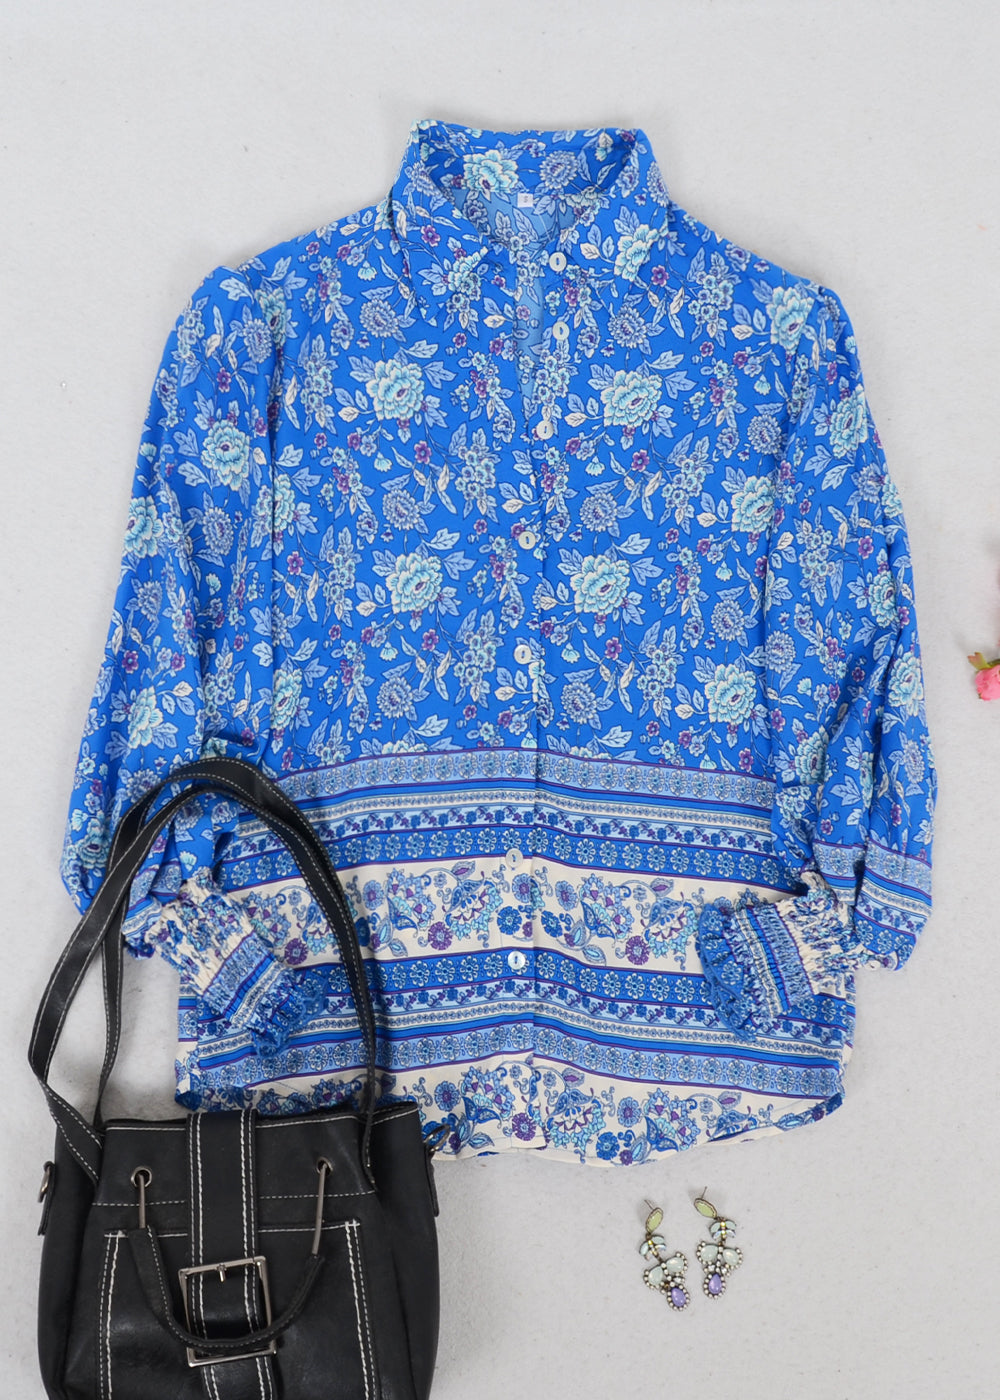 Oriental Floral Collared Shirt